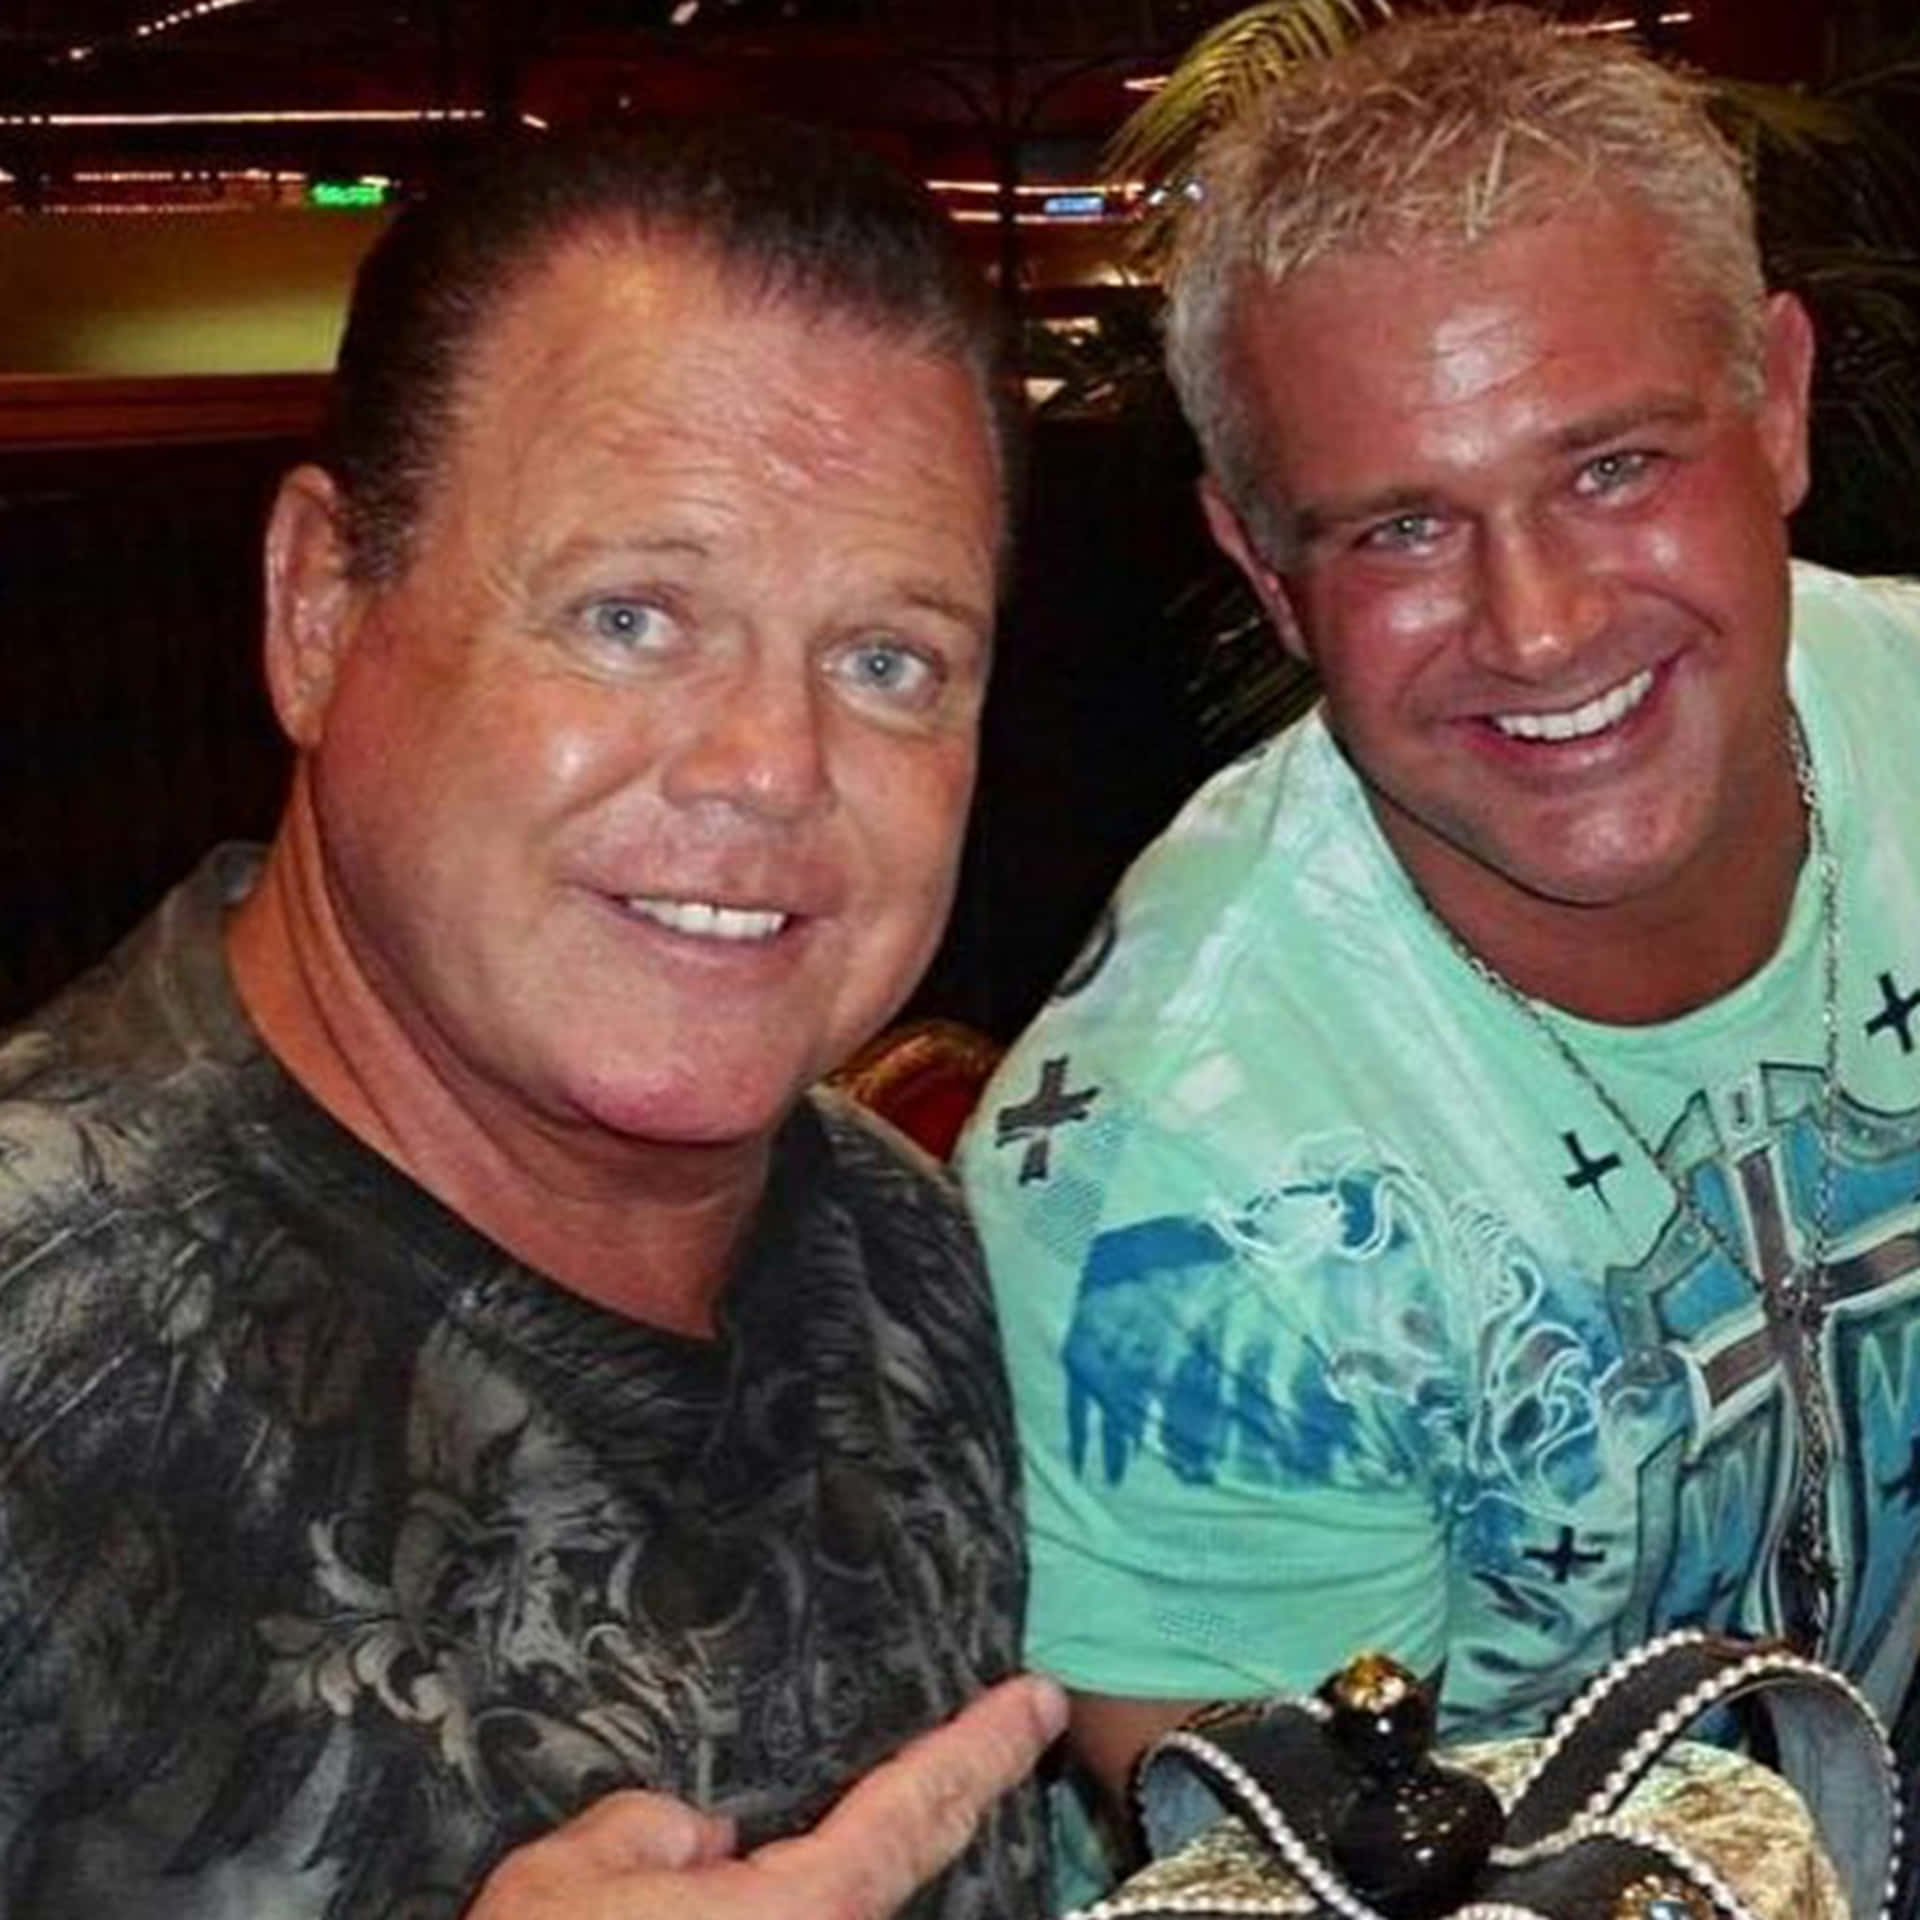 Legendary WWE Commentator Jerry Lawler with renowned wrestler Brian Christopher. Wallpaper